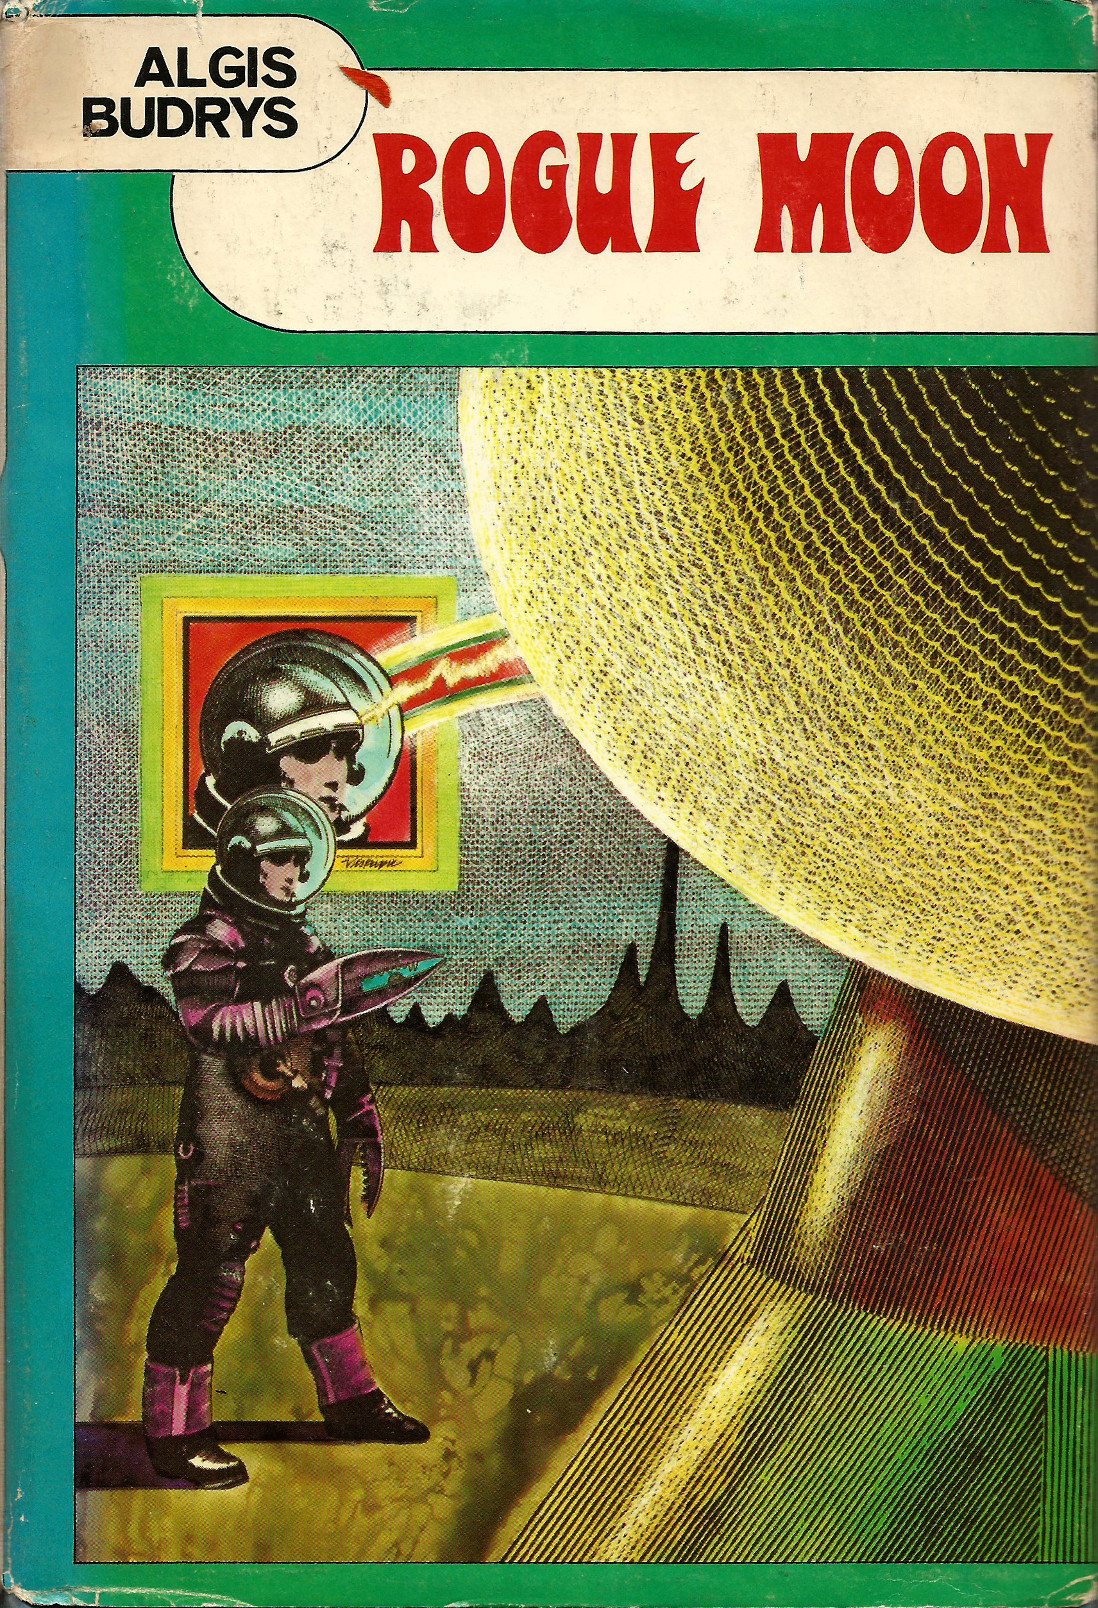 Rogue Moon, by Algis Budrys (Nelson Doubleday Inc. 1960). From The Last Bookstore